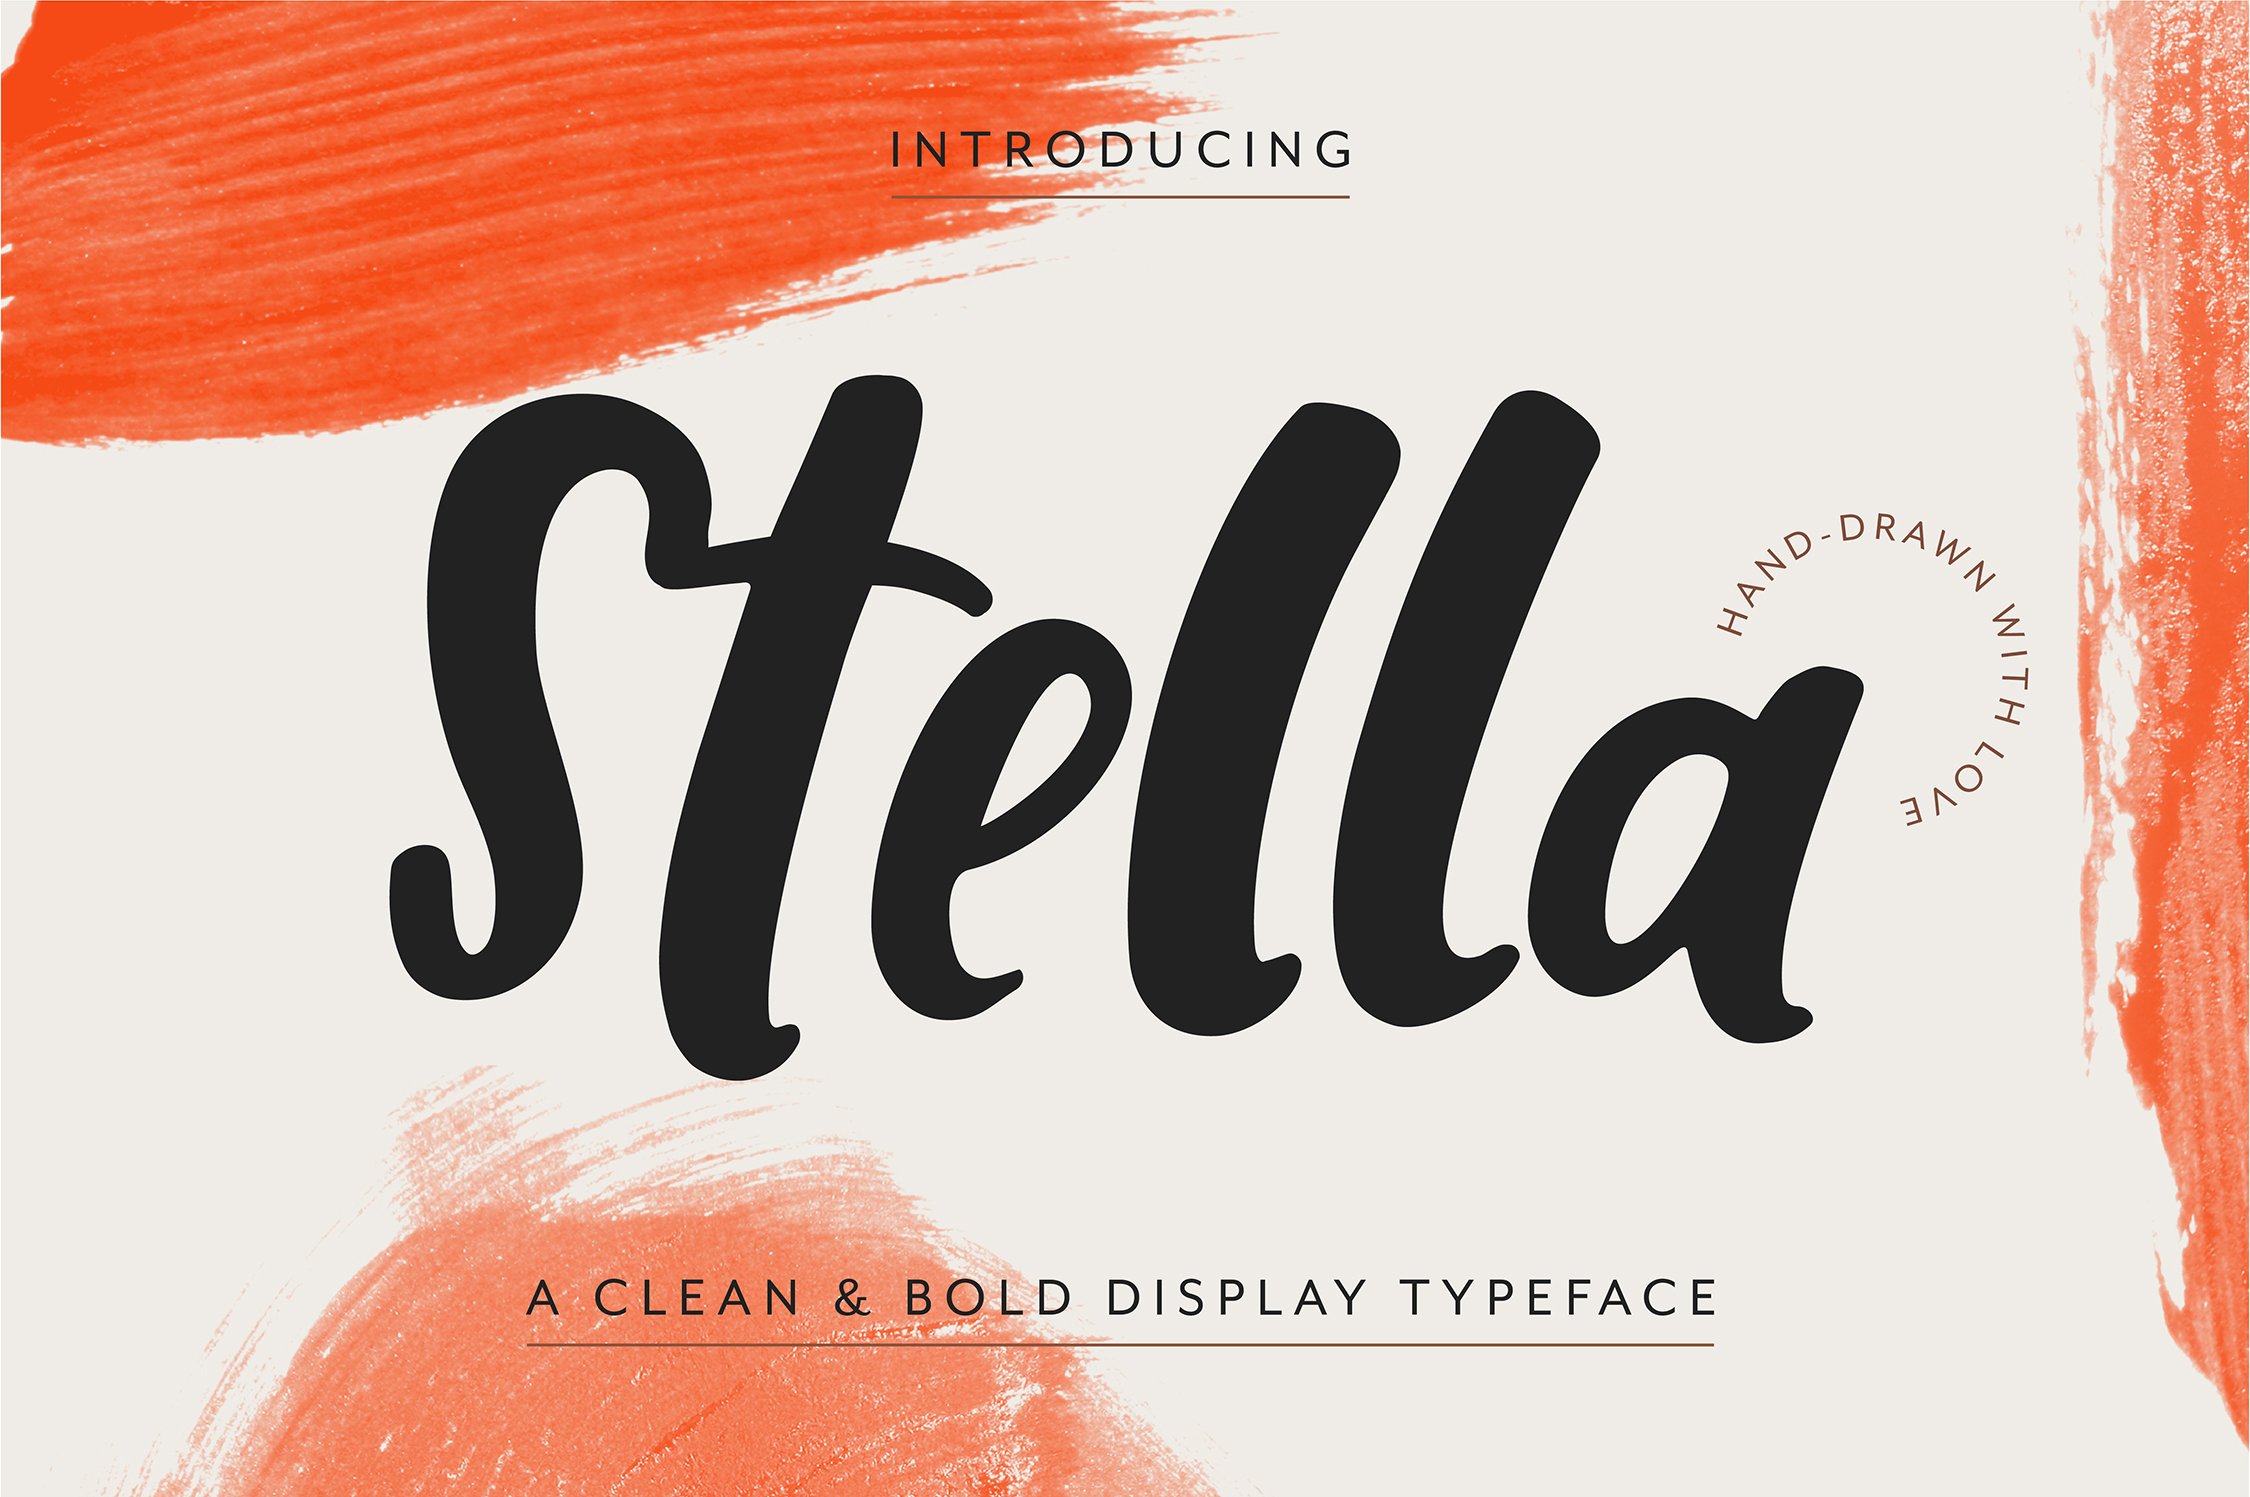 Stella: A Handlettered Font cover image.